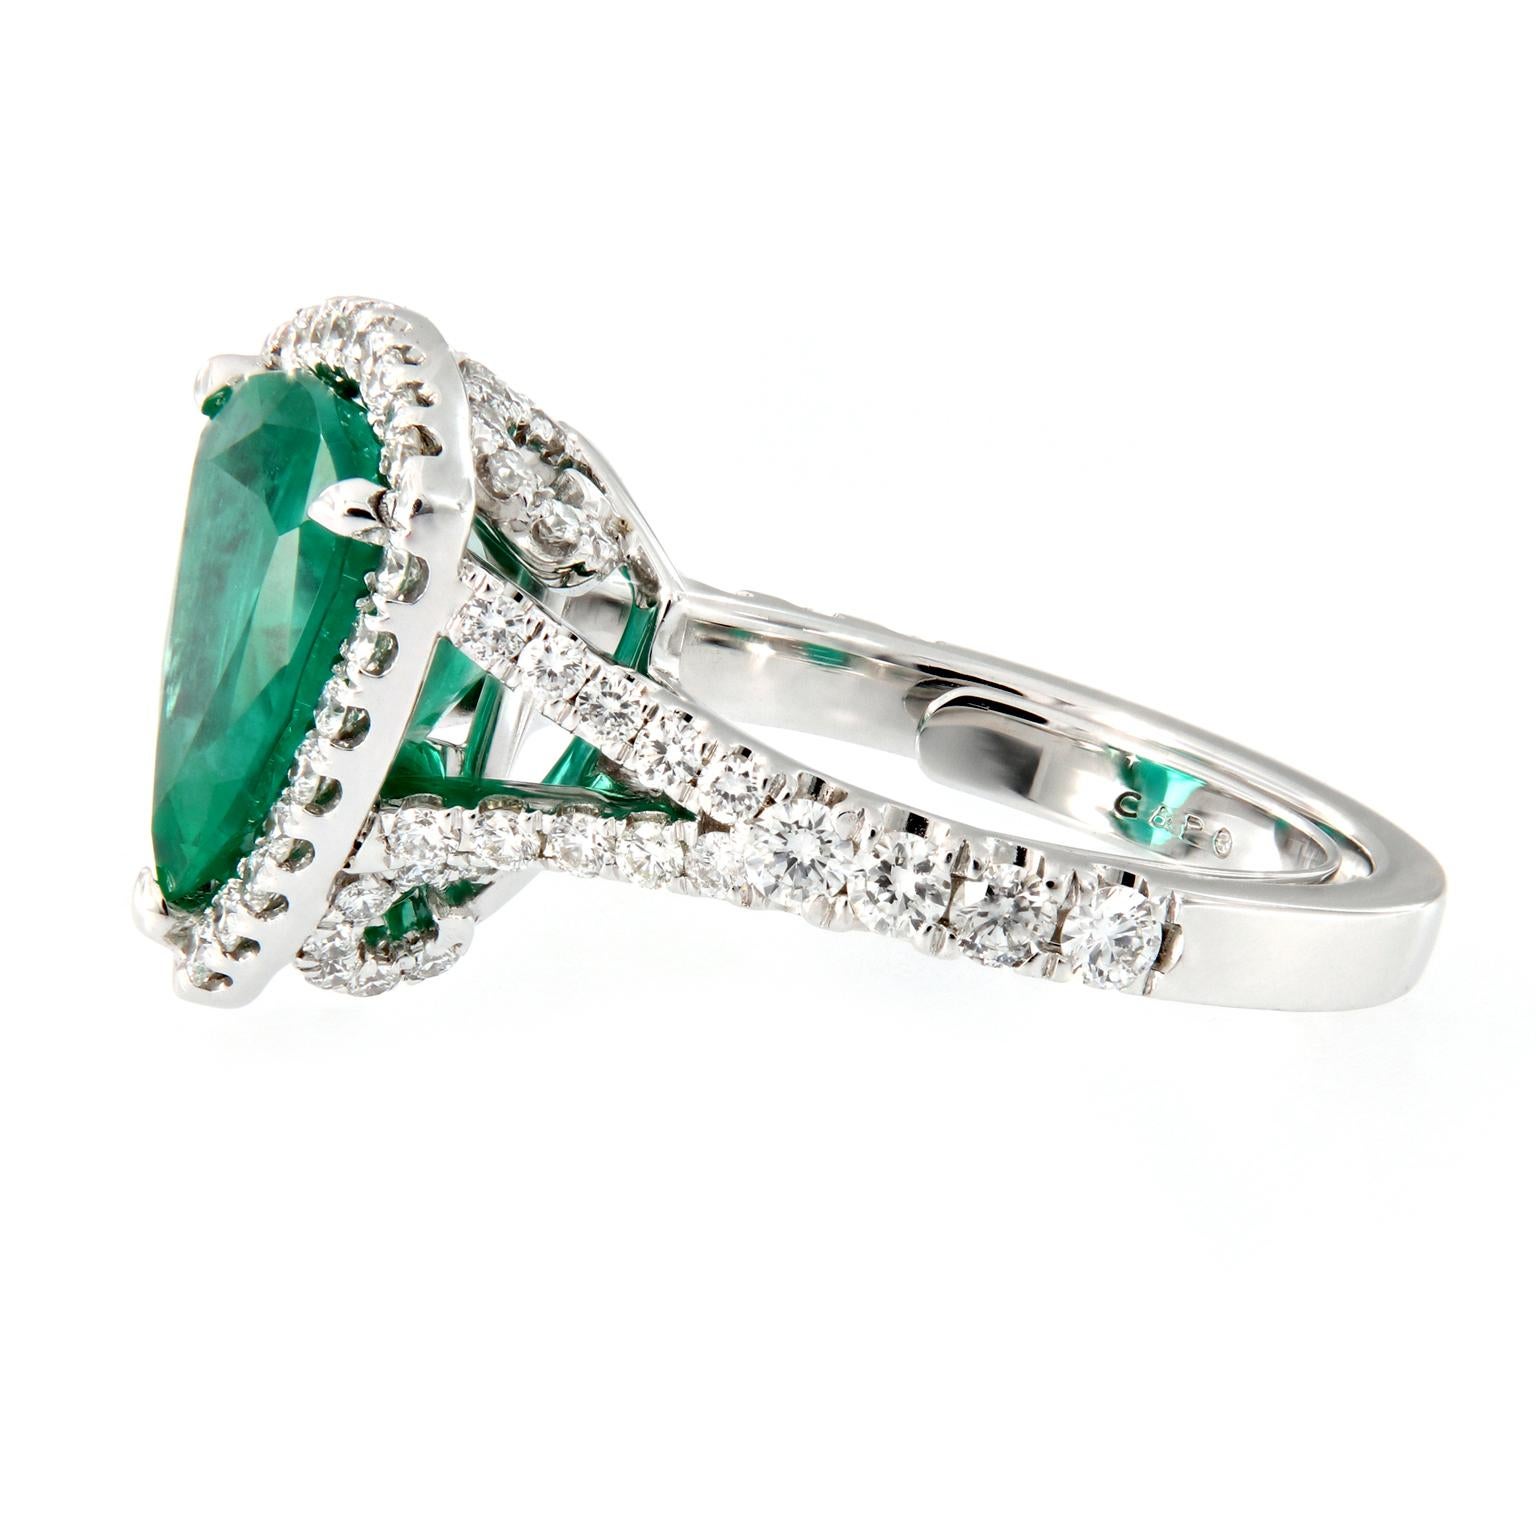 Modern and strikingly unique, this trillion cut emerald ring is sure to stand out. The center stone is a 3.88 carat Zambian emerald beautifully accented with 1.0 cttw of VVS, E RBC diamonds set in 18k white gold. 

Ring Size 6.5.